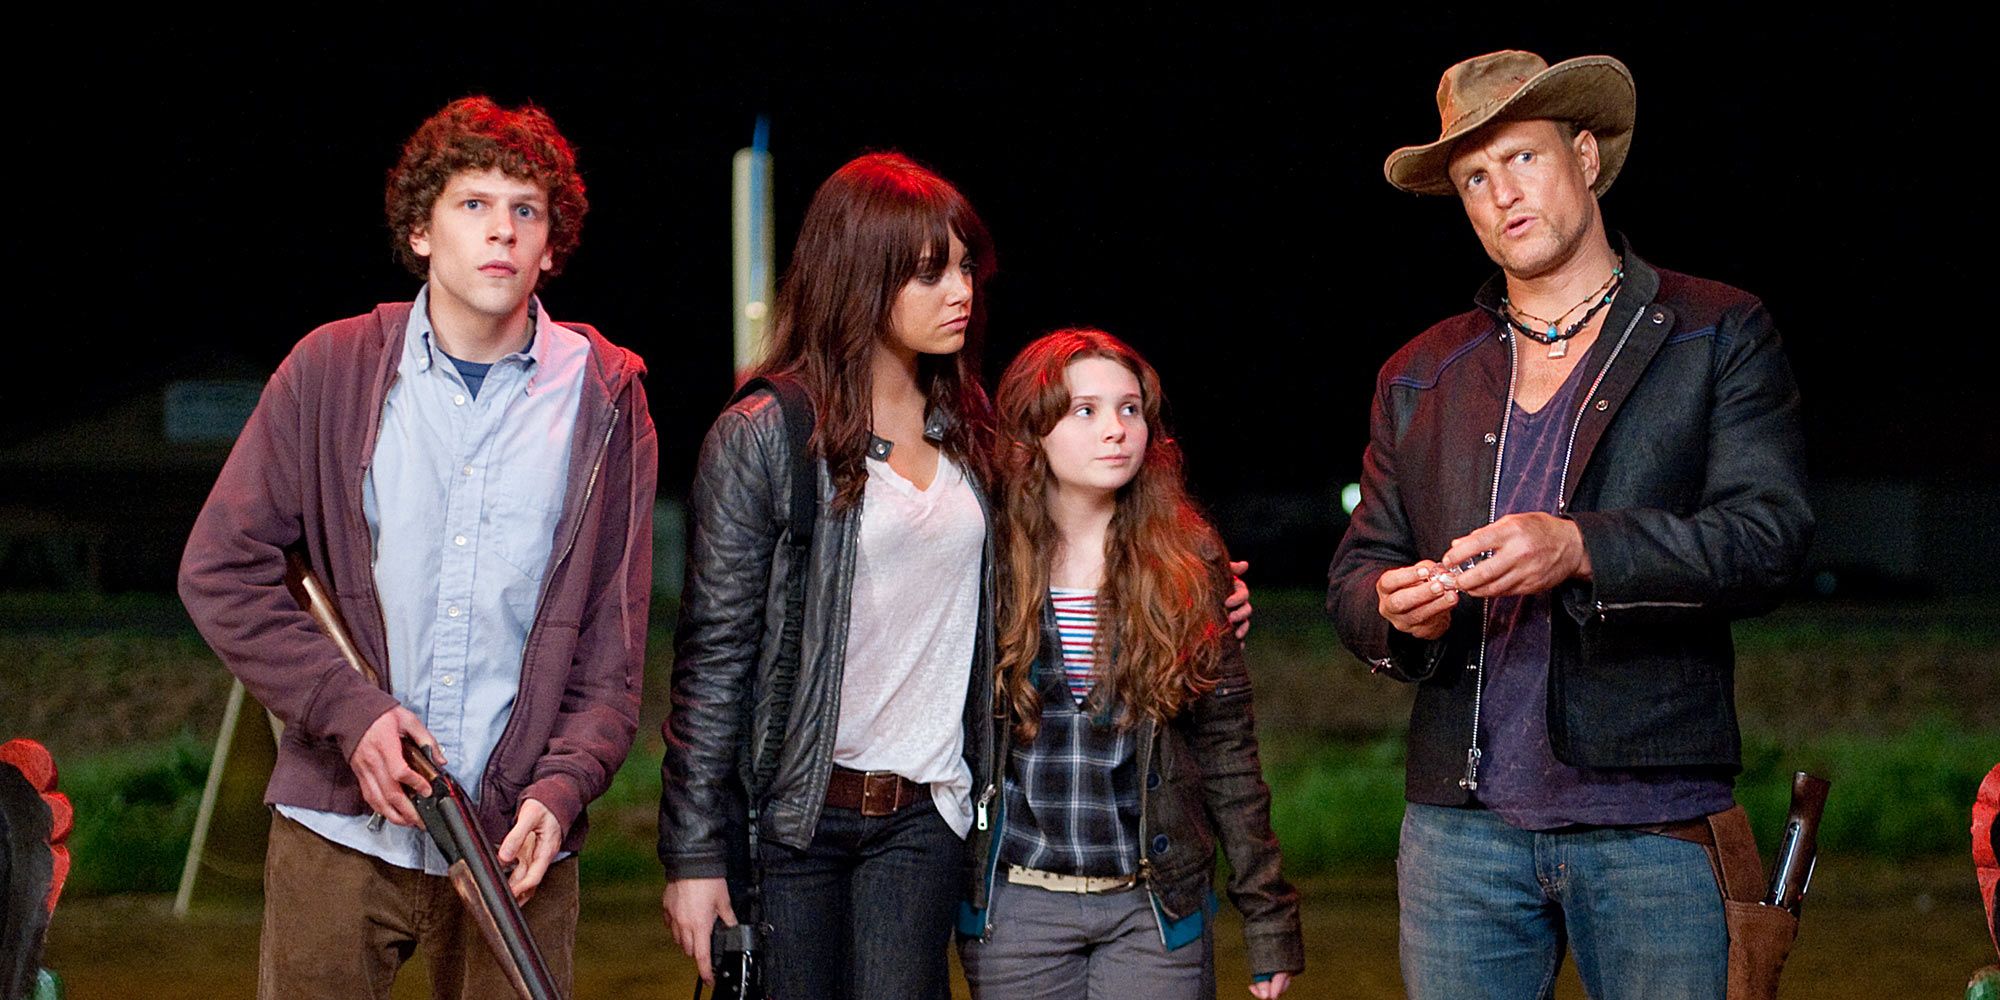 ZOMBIELAND 2009 CHARACTERS STANDING TOGETHER